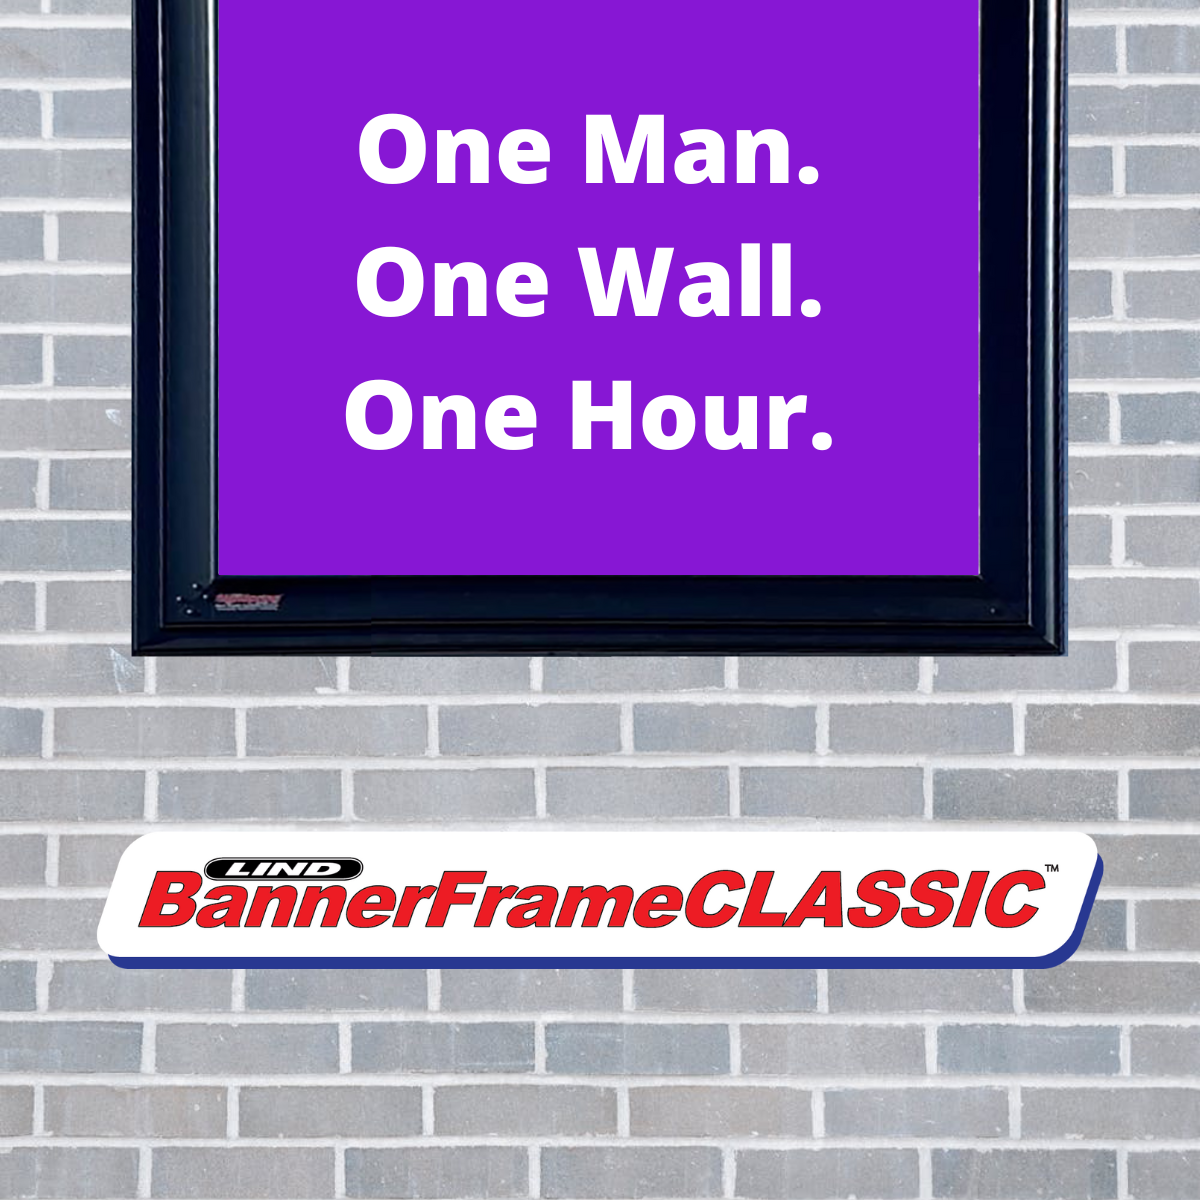 One Man. One Wall. One Hour.